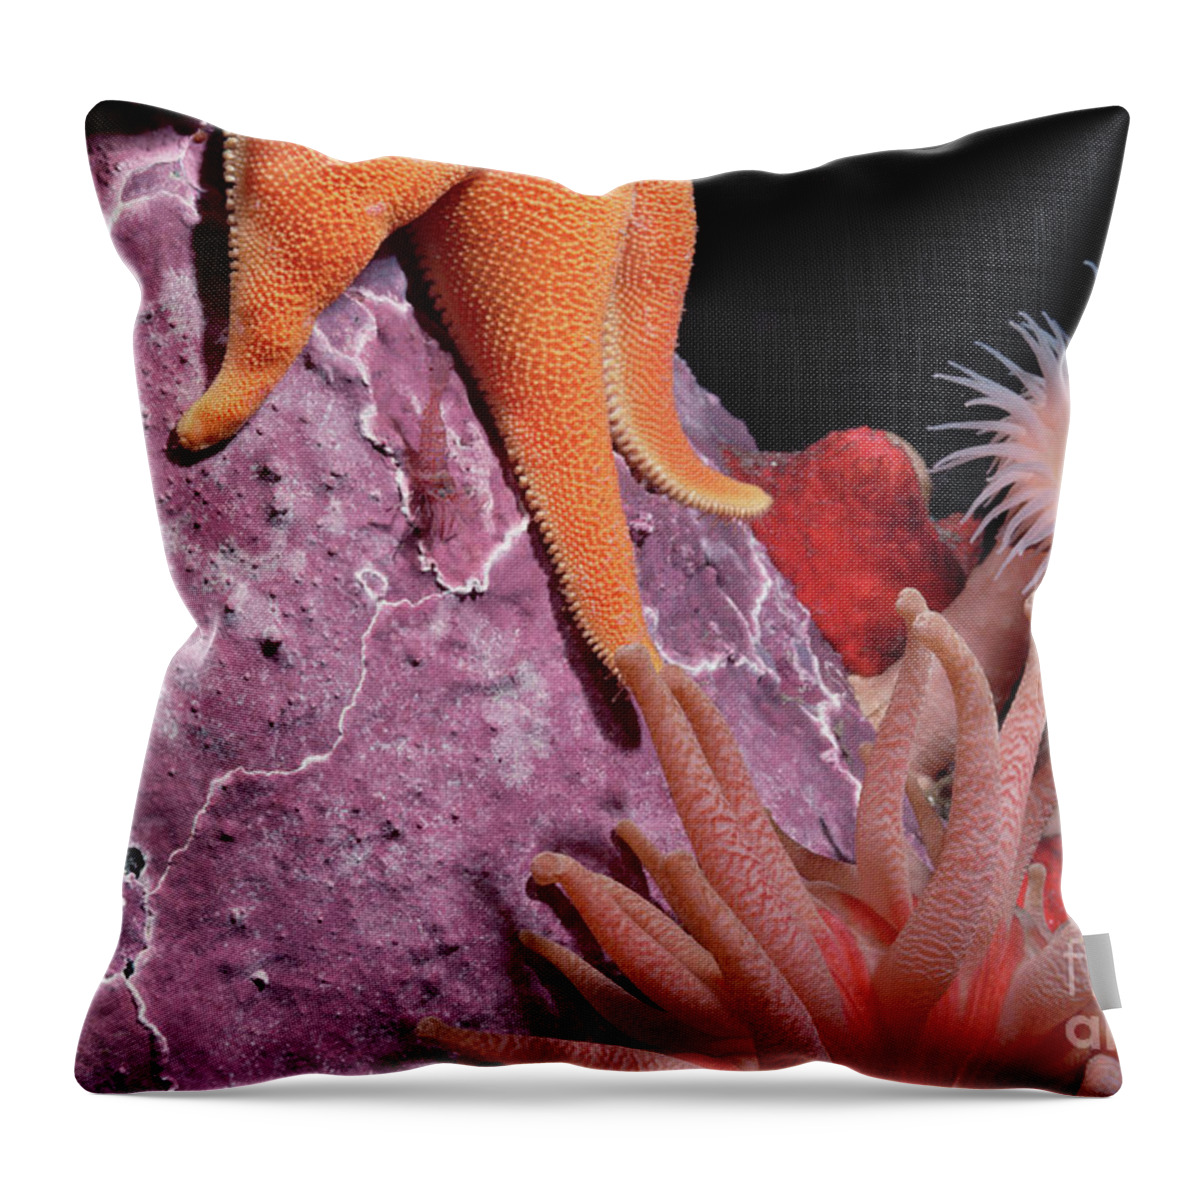 Mp Throw Pillow featuring the photograph Sea Star and Anemones Baffin Isl by Flip Nicklin